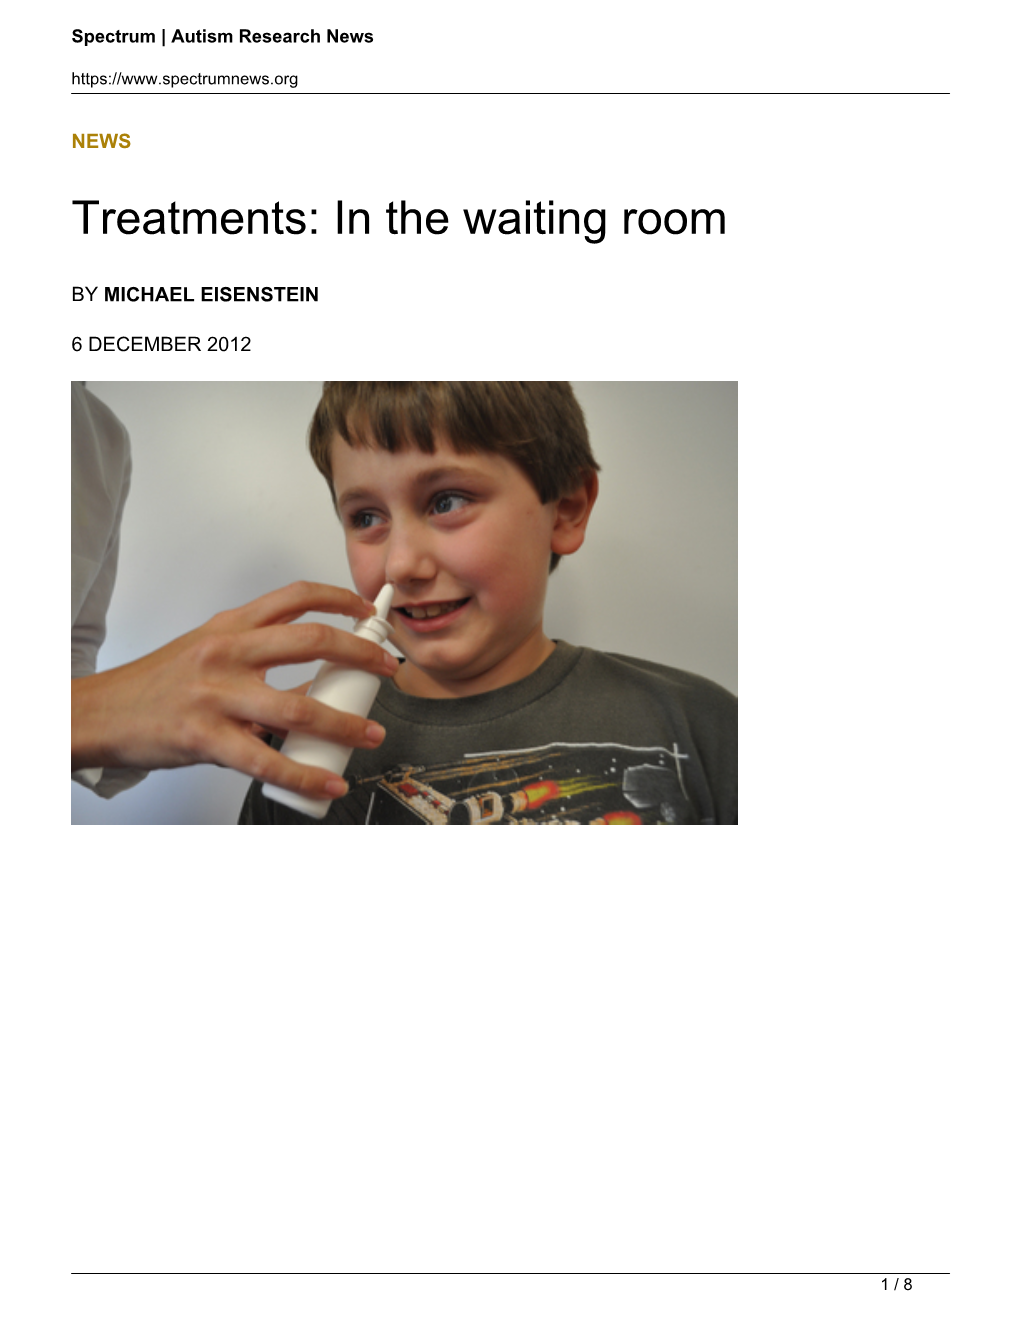 Treatments: in the Waiting Room